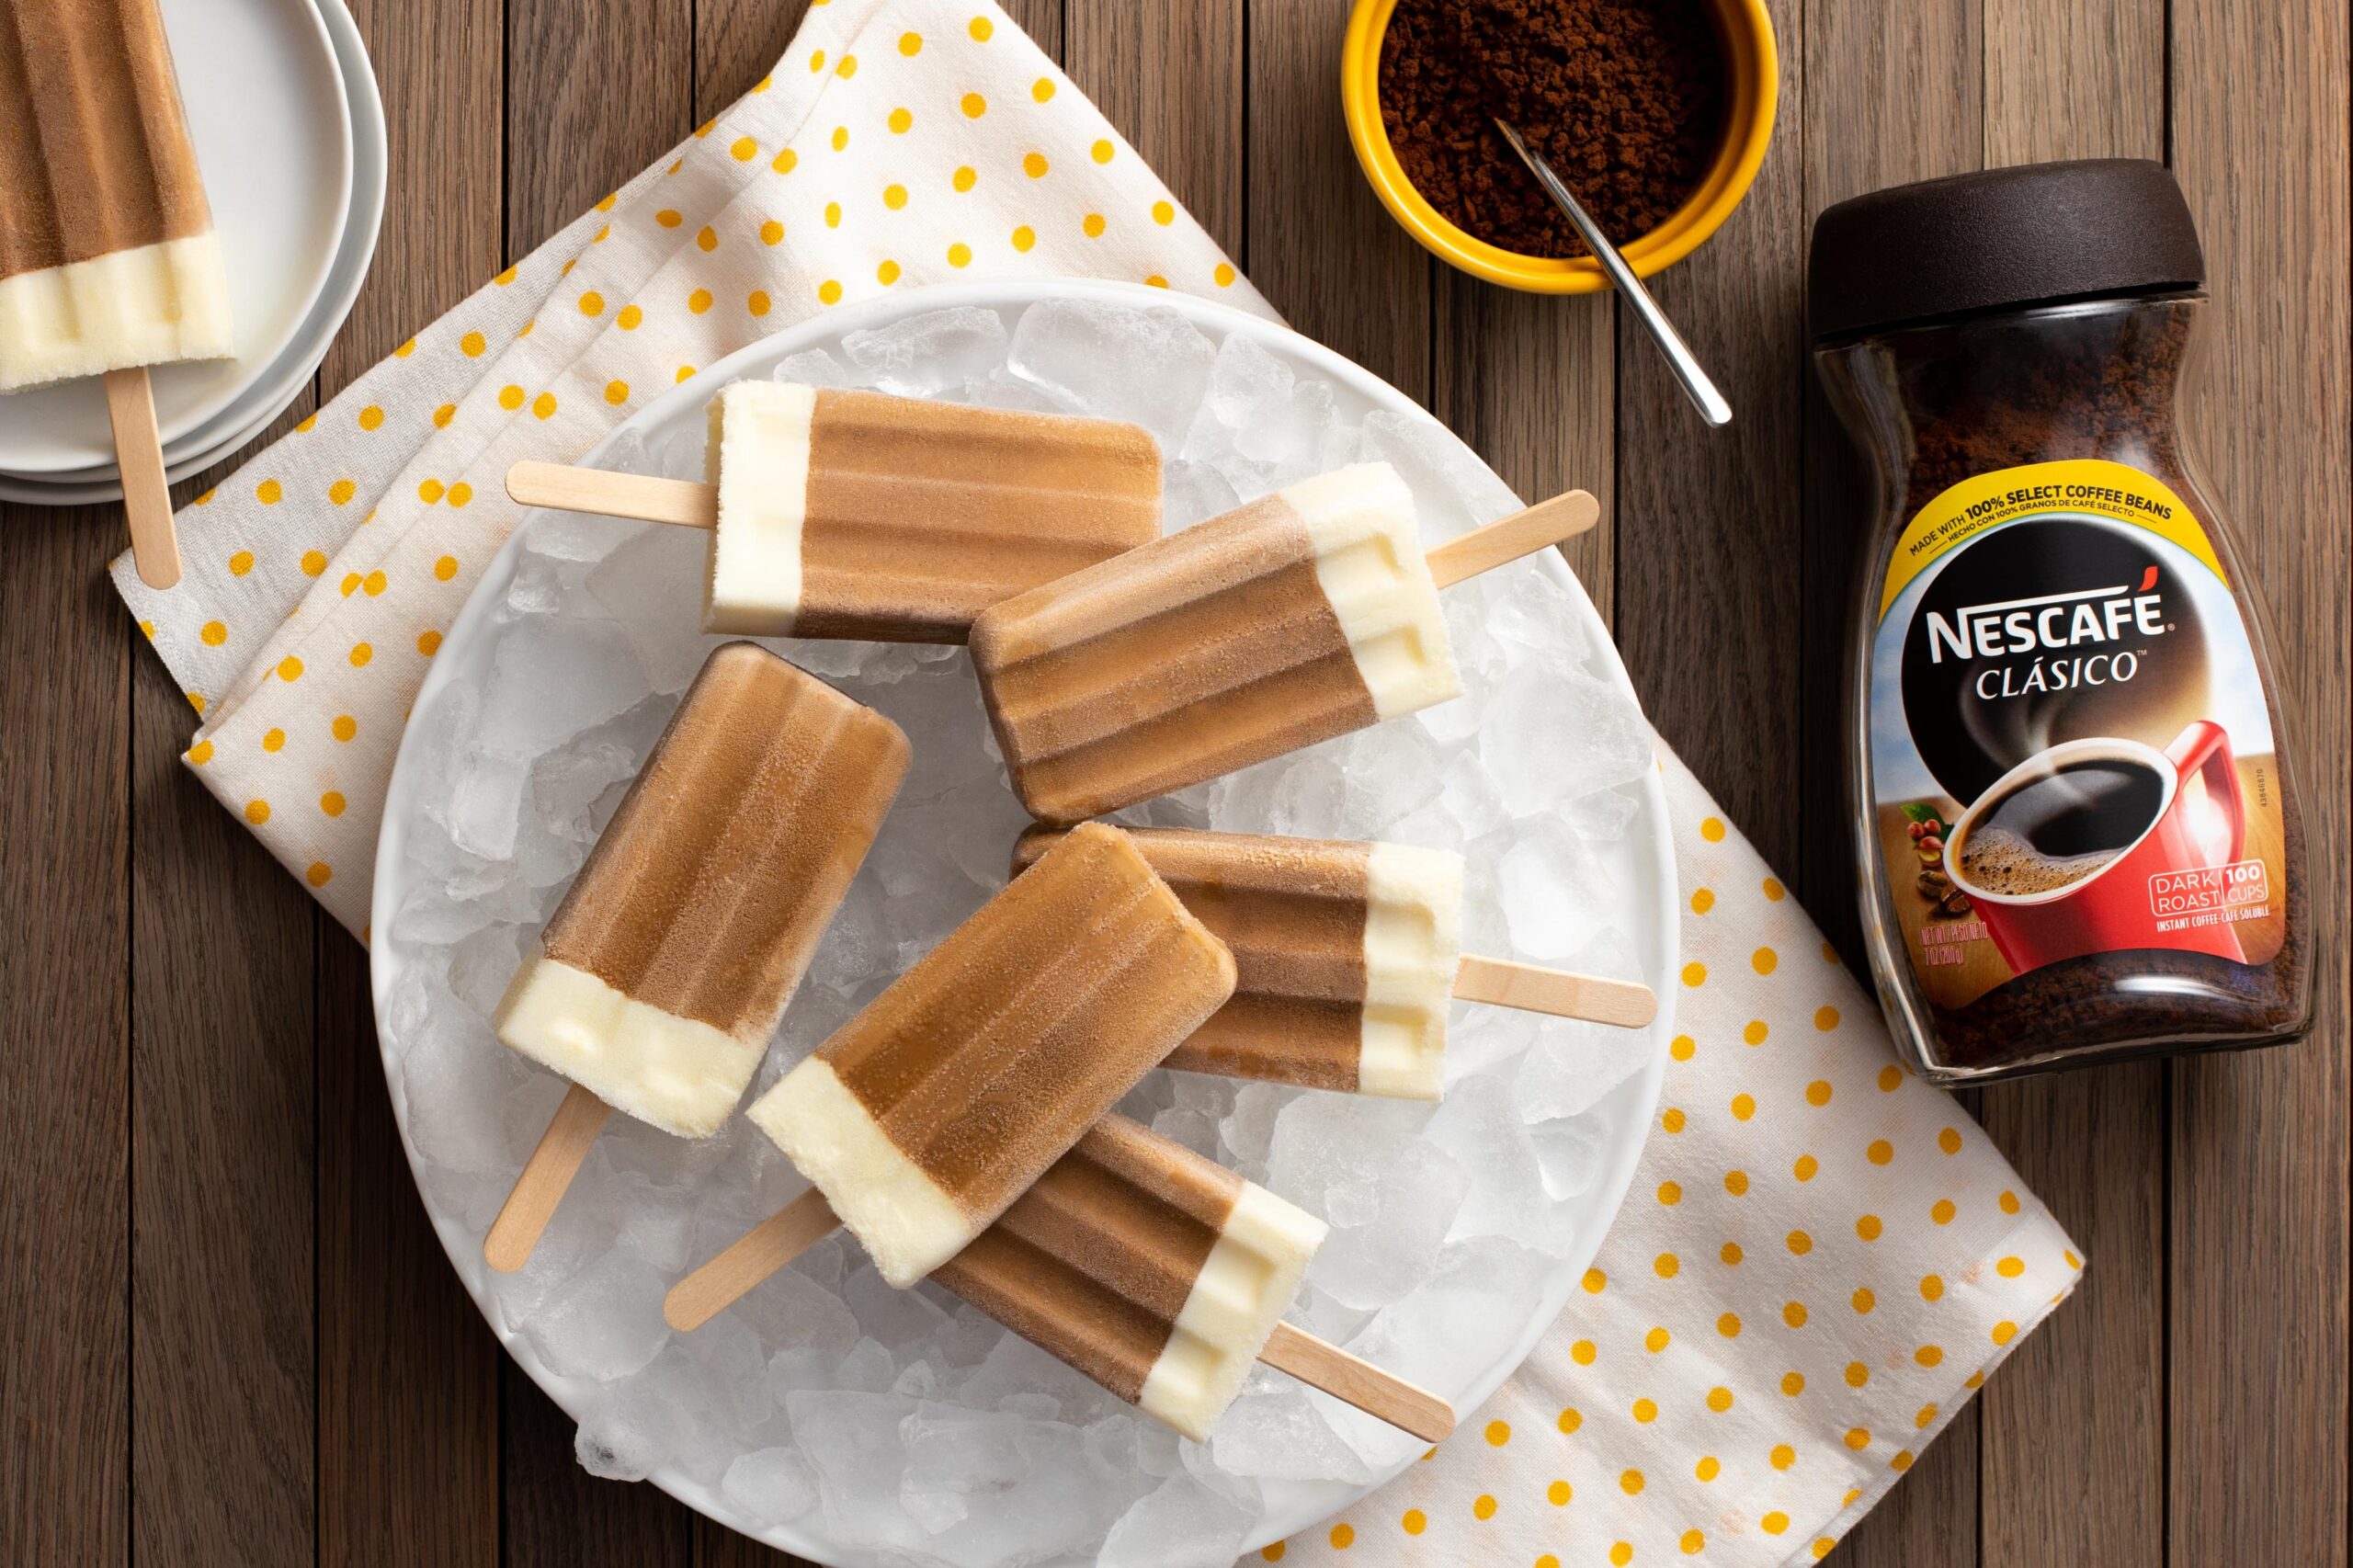  Are traditional iced coffees getting boring? Try our popsicles!